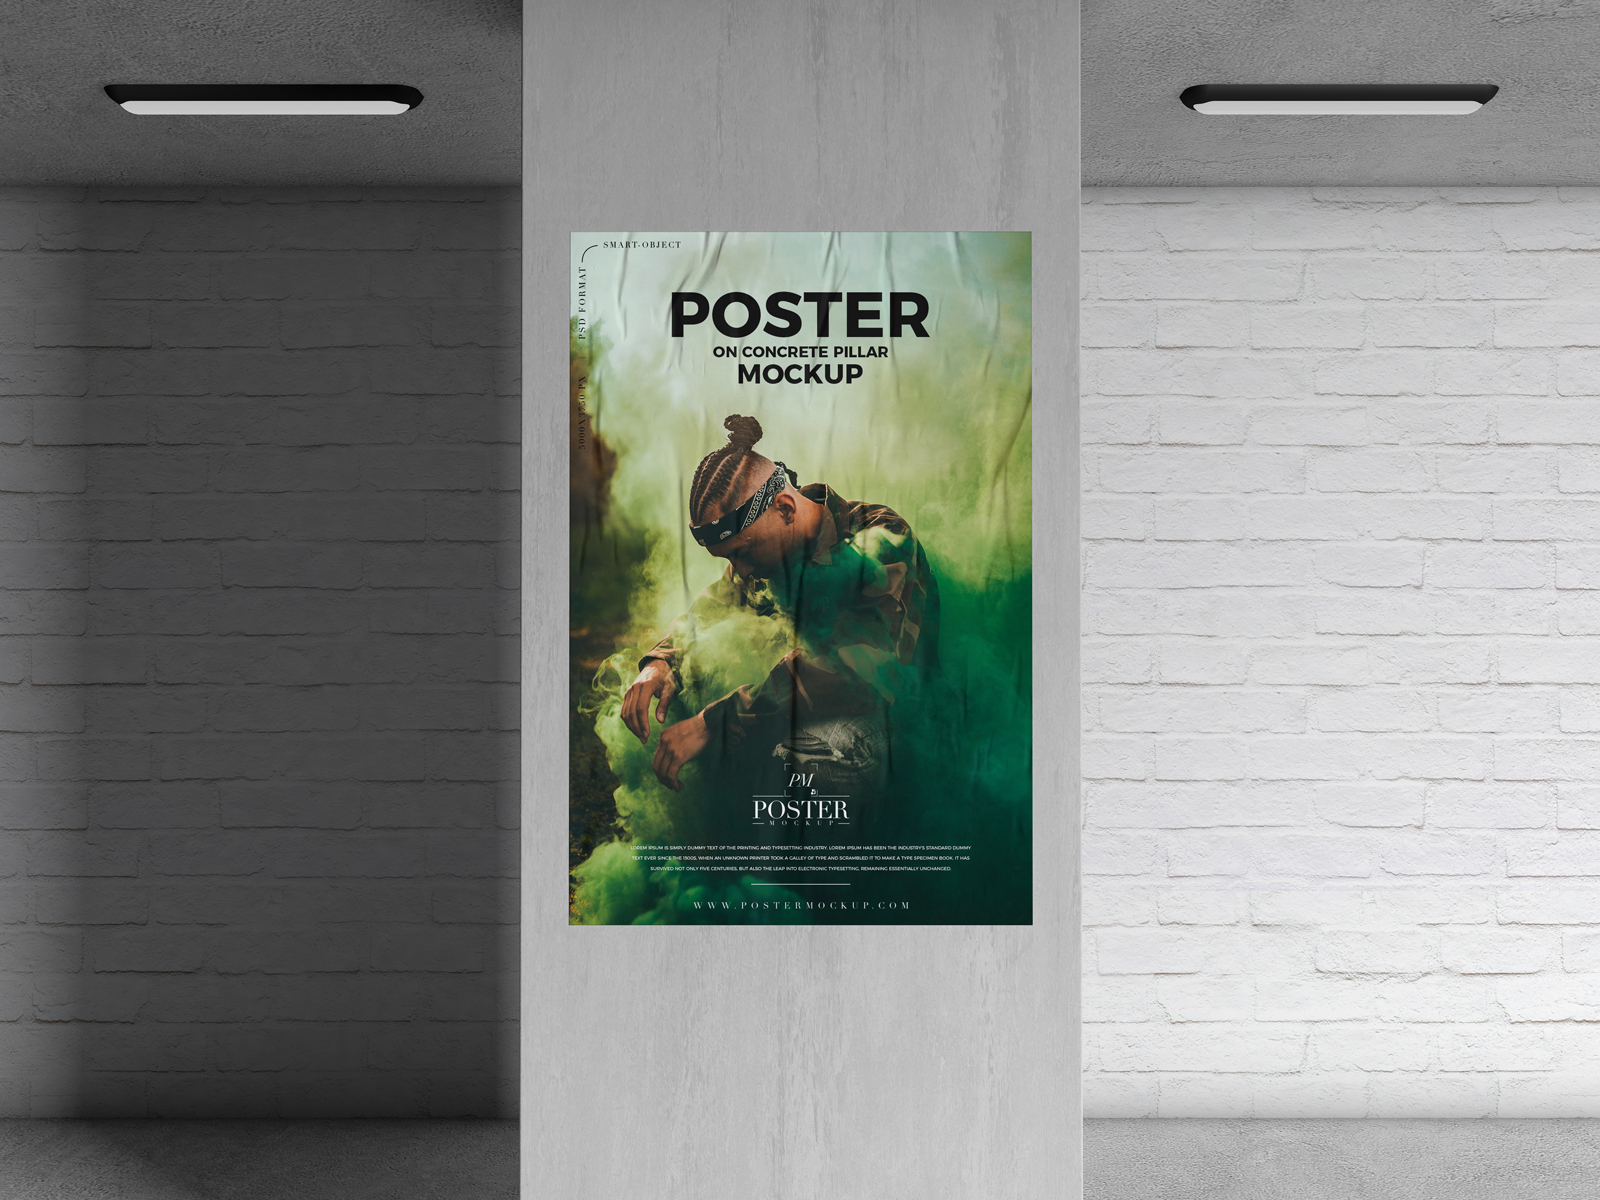 Download Concrete Pillar Poster Mockup Free by Poster Mockup on ...